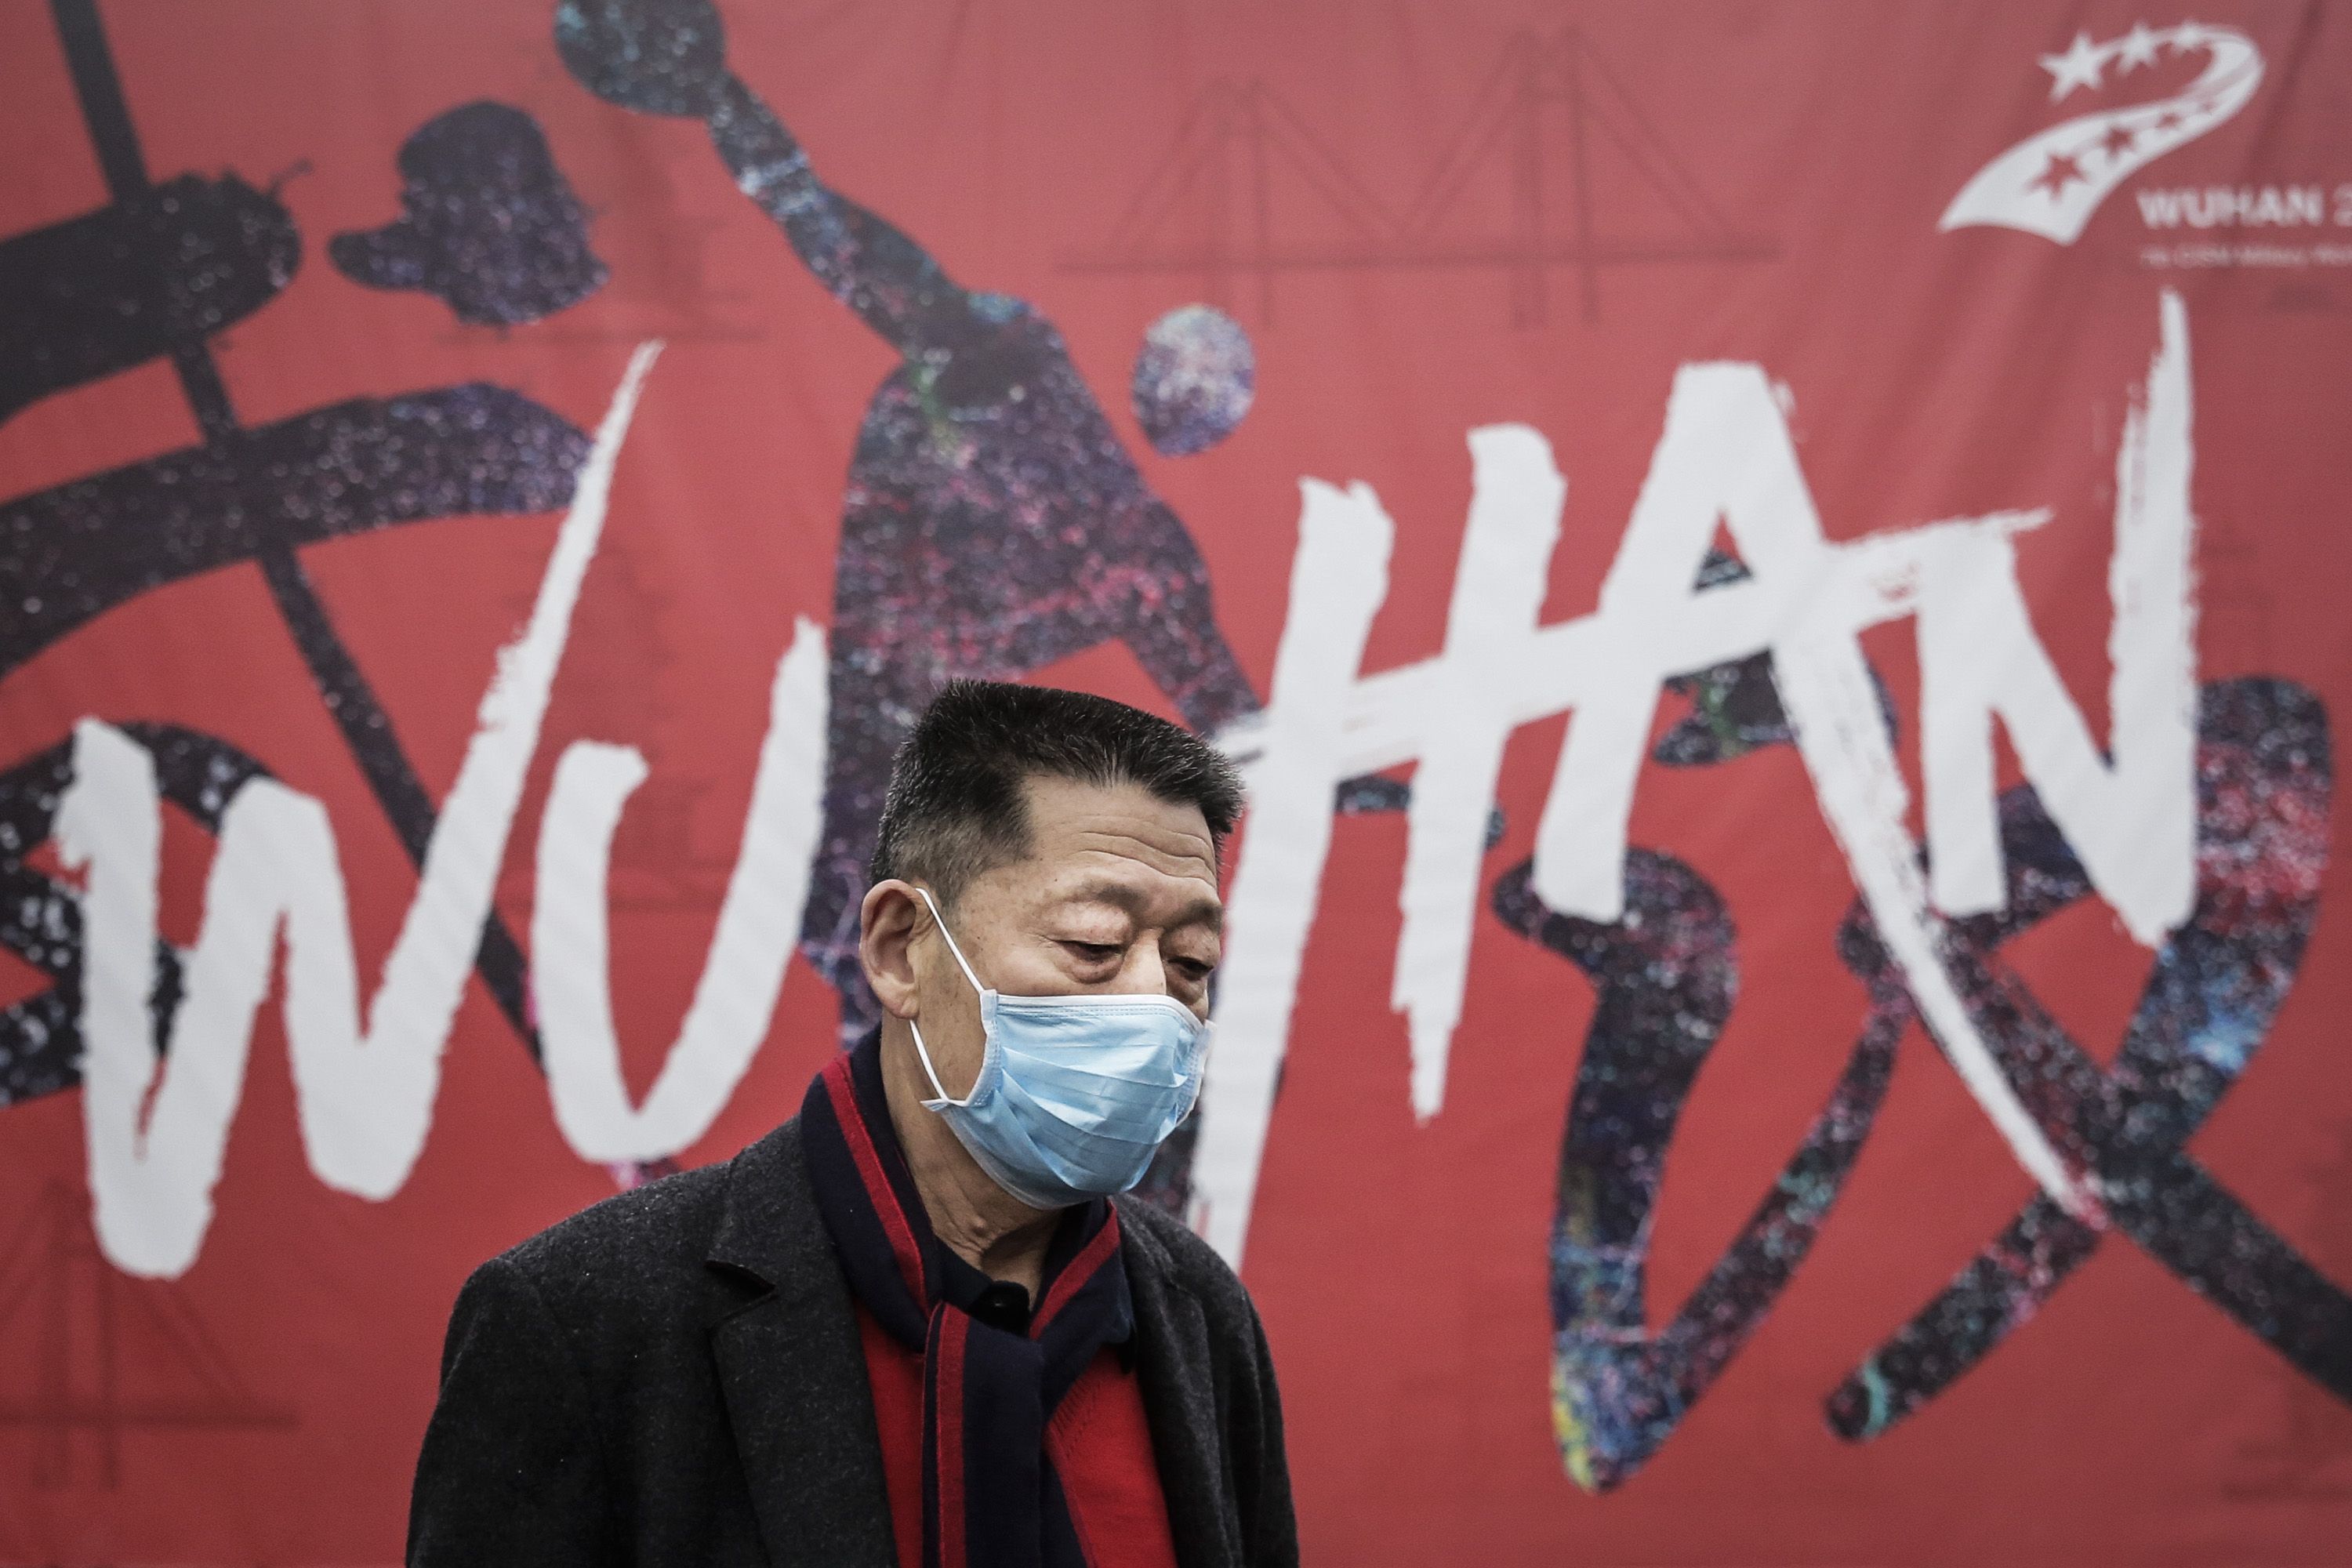  A man wears a mask while walking in the street on January 22, 2020 in Wuhan, Hubei province, China. 